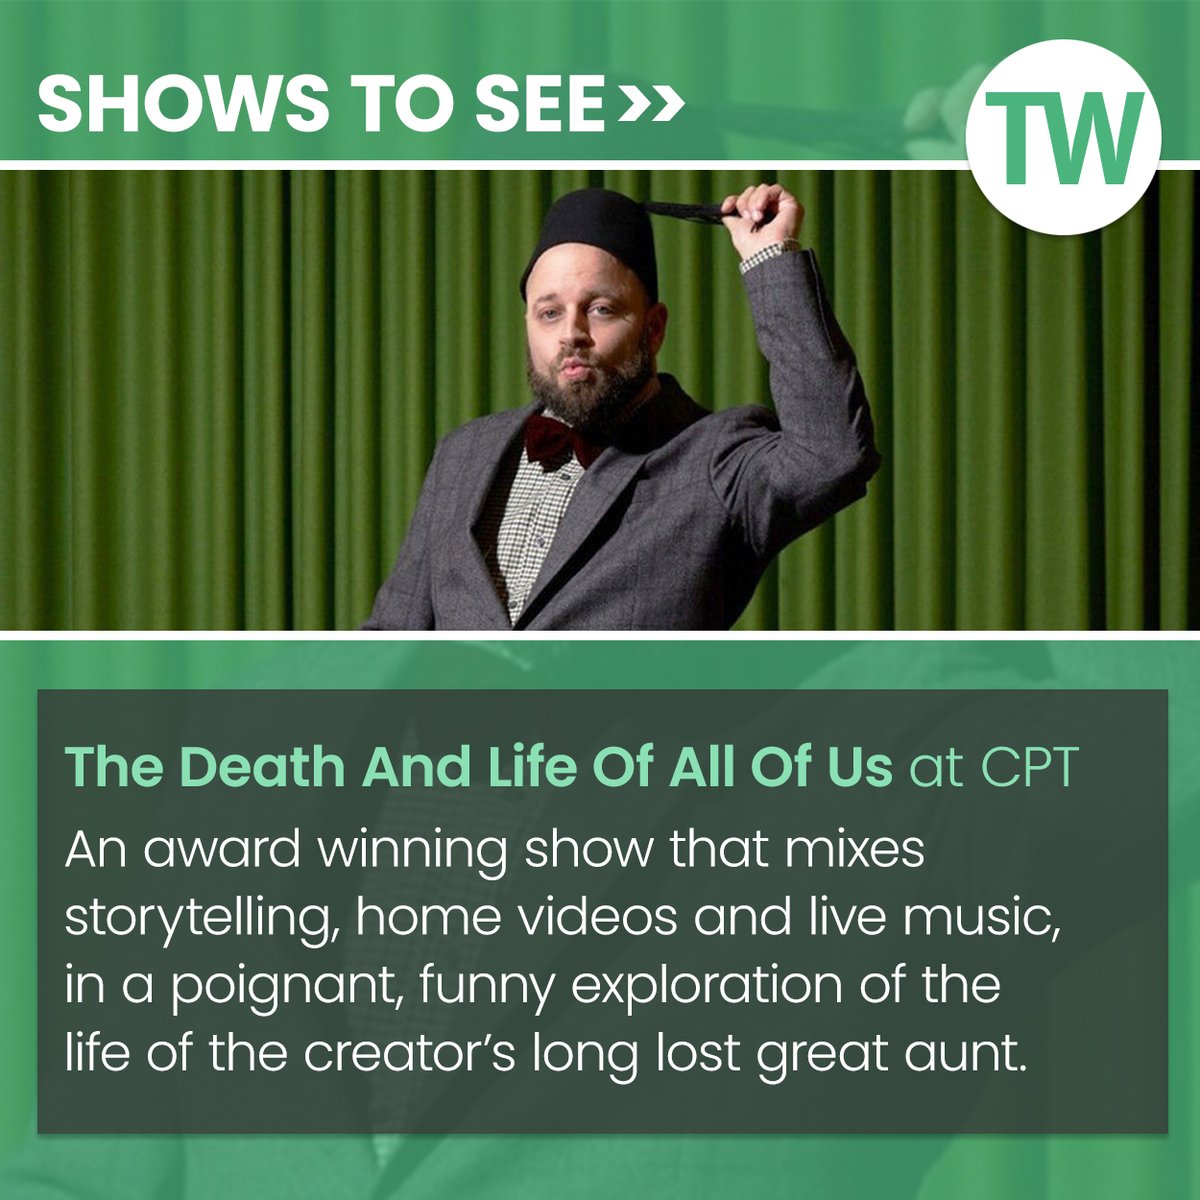 Among our recommended shows to see this week: ‘The Death And Life Of All Of Us’ by Victor Esses at Camden People’s Theatre. Get more show tips here: bit.ly/3xeLRZ7 @CamdenPT @vhesses